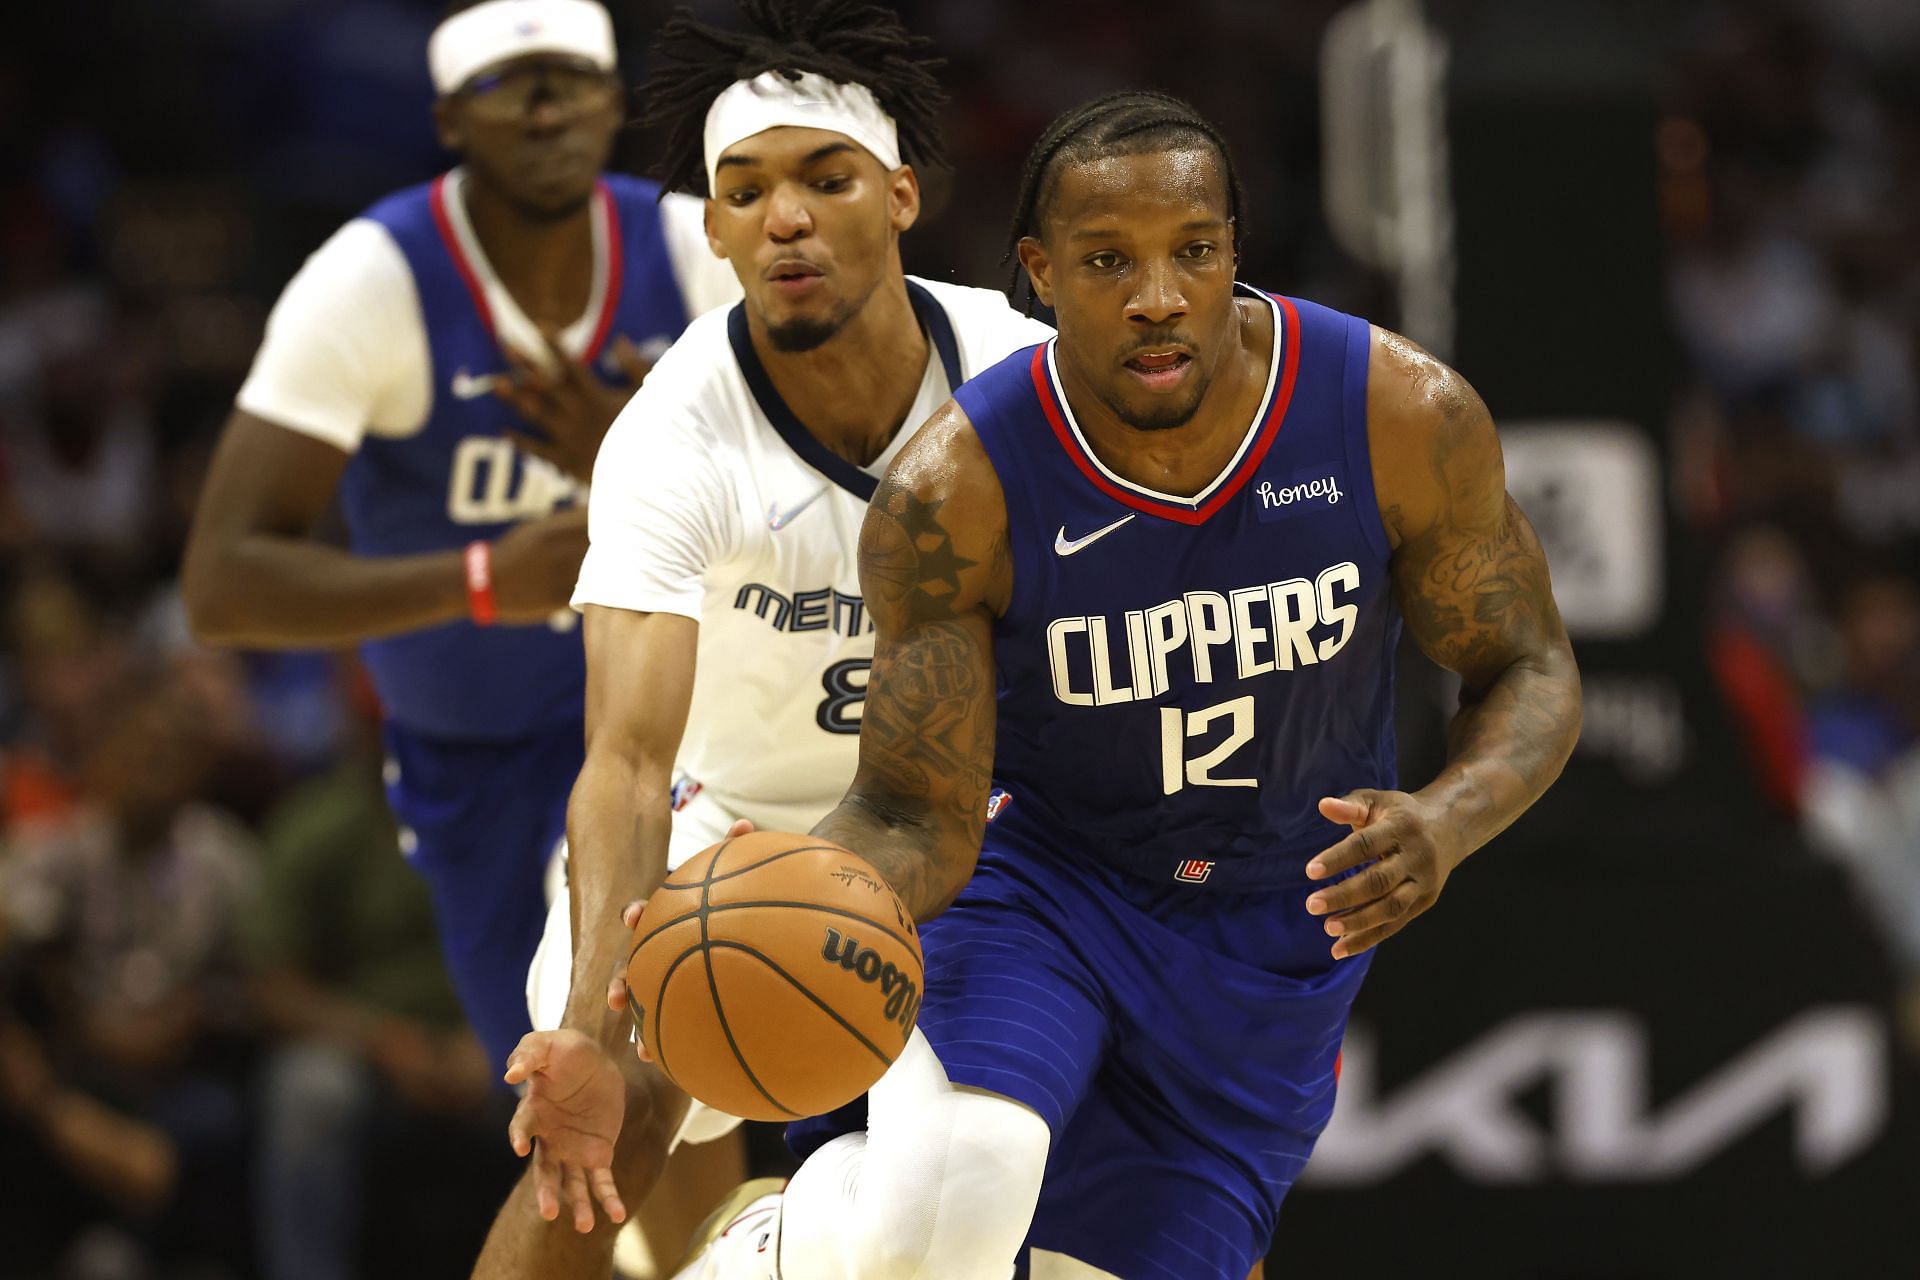 Eric Bledsoe #12 of the LA Clippers dribbles up court during the first half of a game against the Memphis Grizzlies at Staples Center on October 23, 2021 in Los Angeles, California.